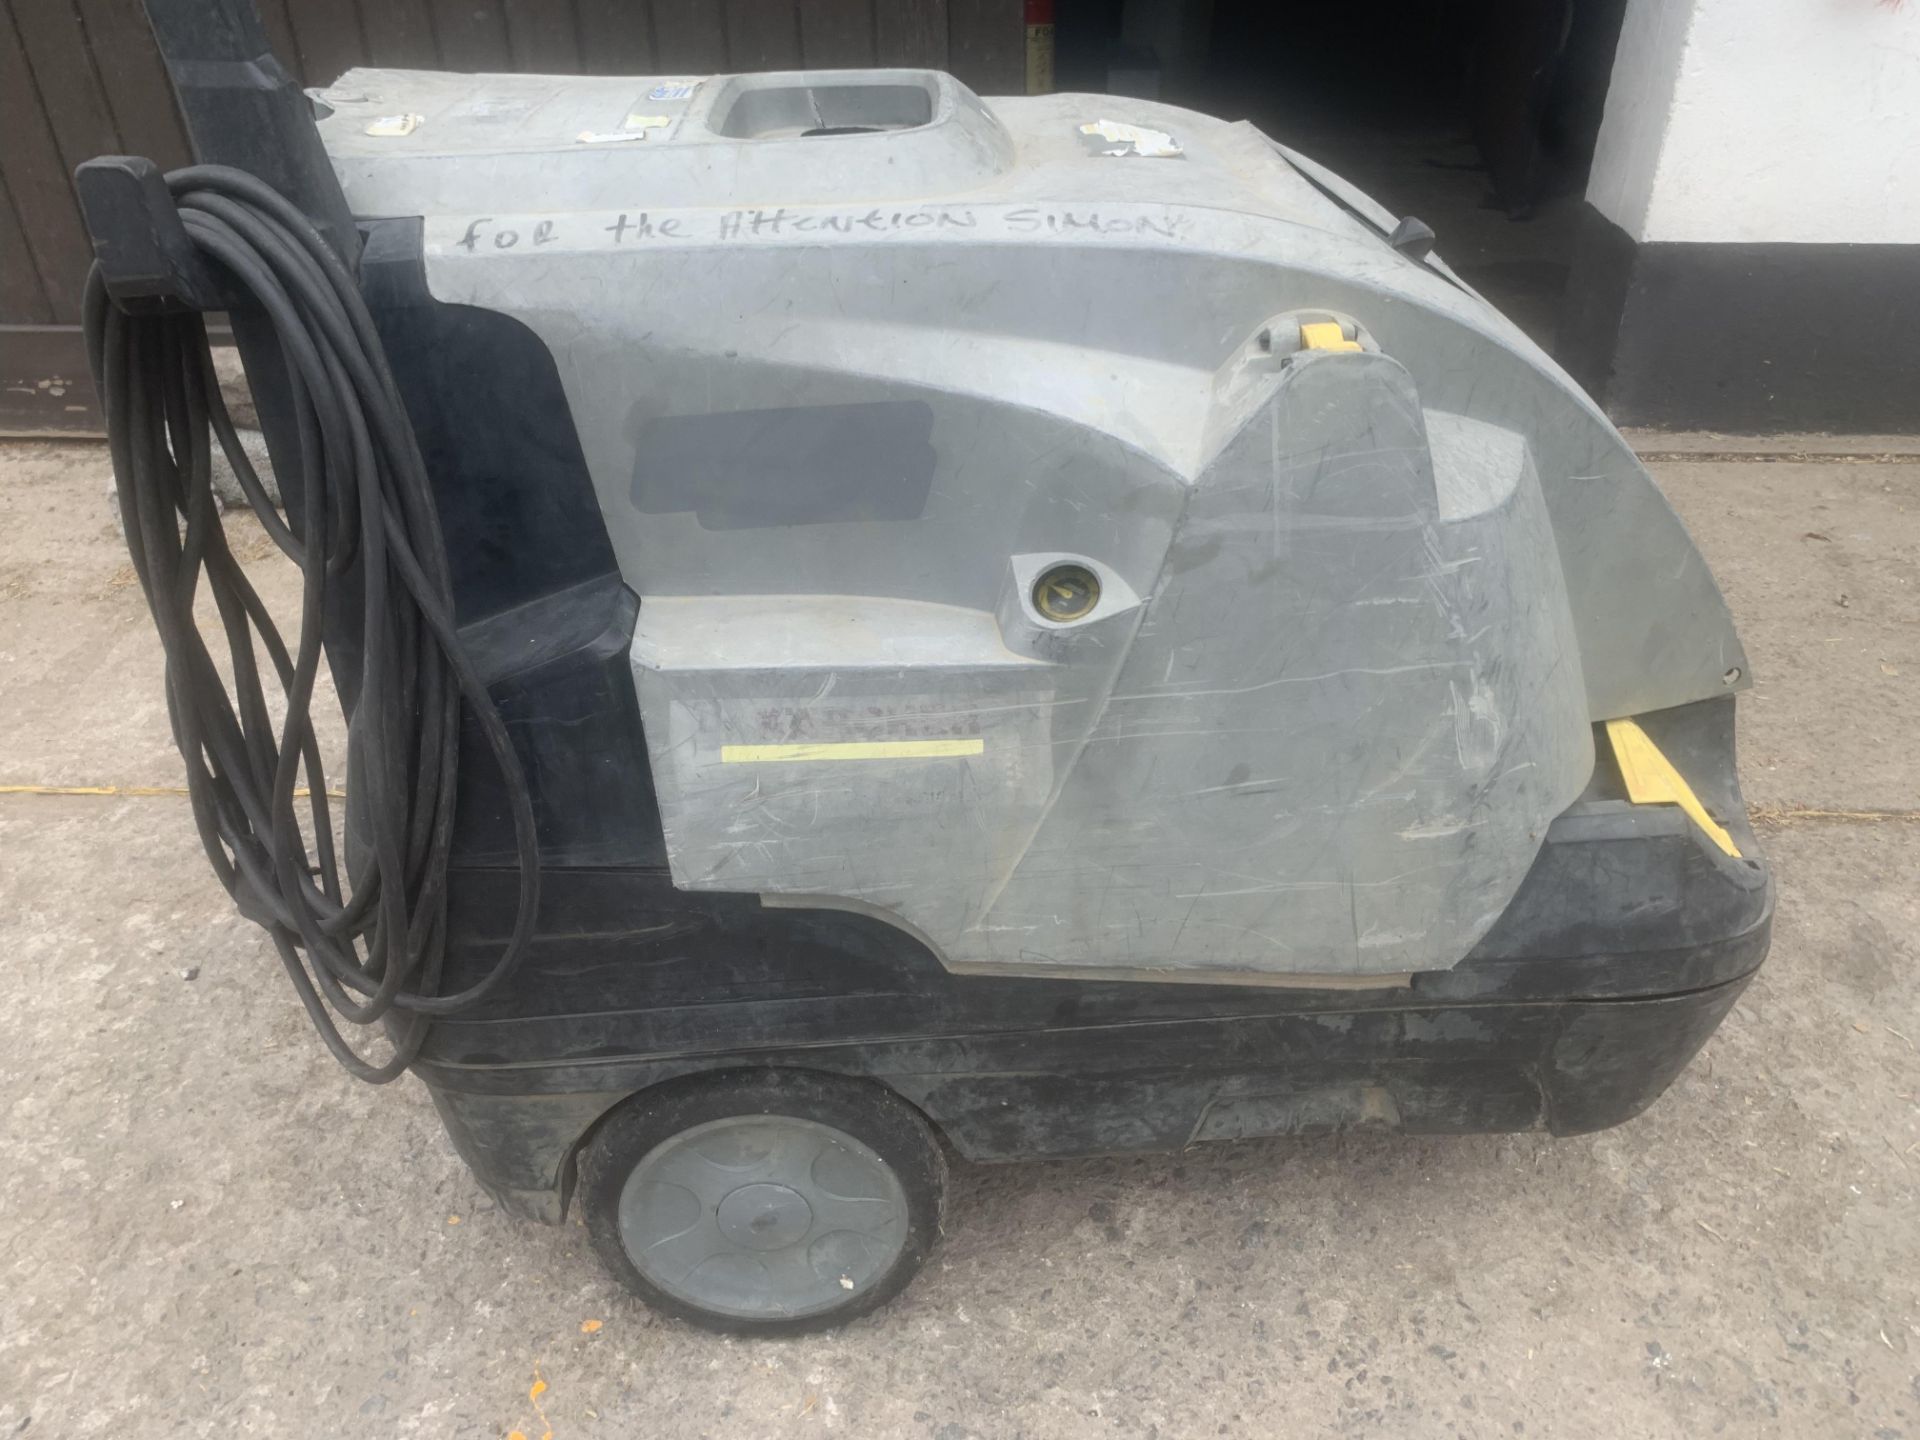 KARCHER PROFEESIONAL HOT AND COLD DIESEL POWER WASHER.LOCATION N IRELAND.